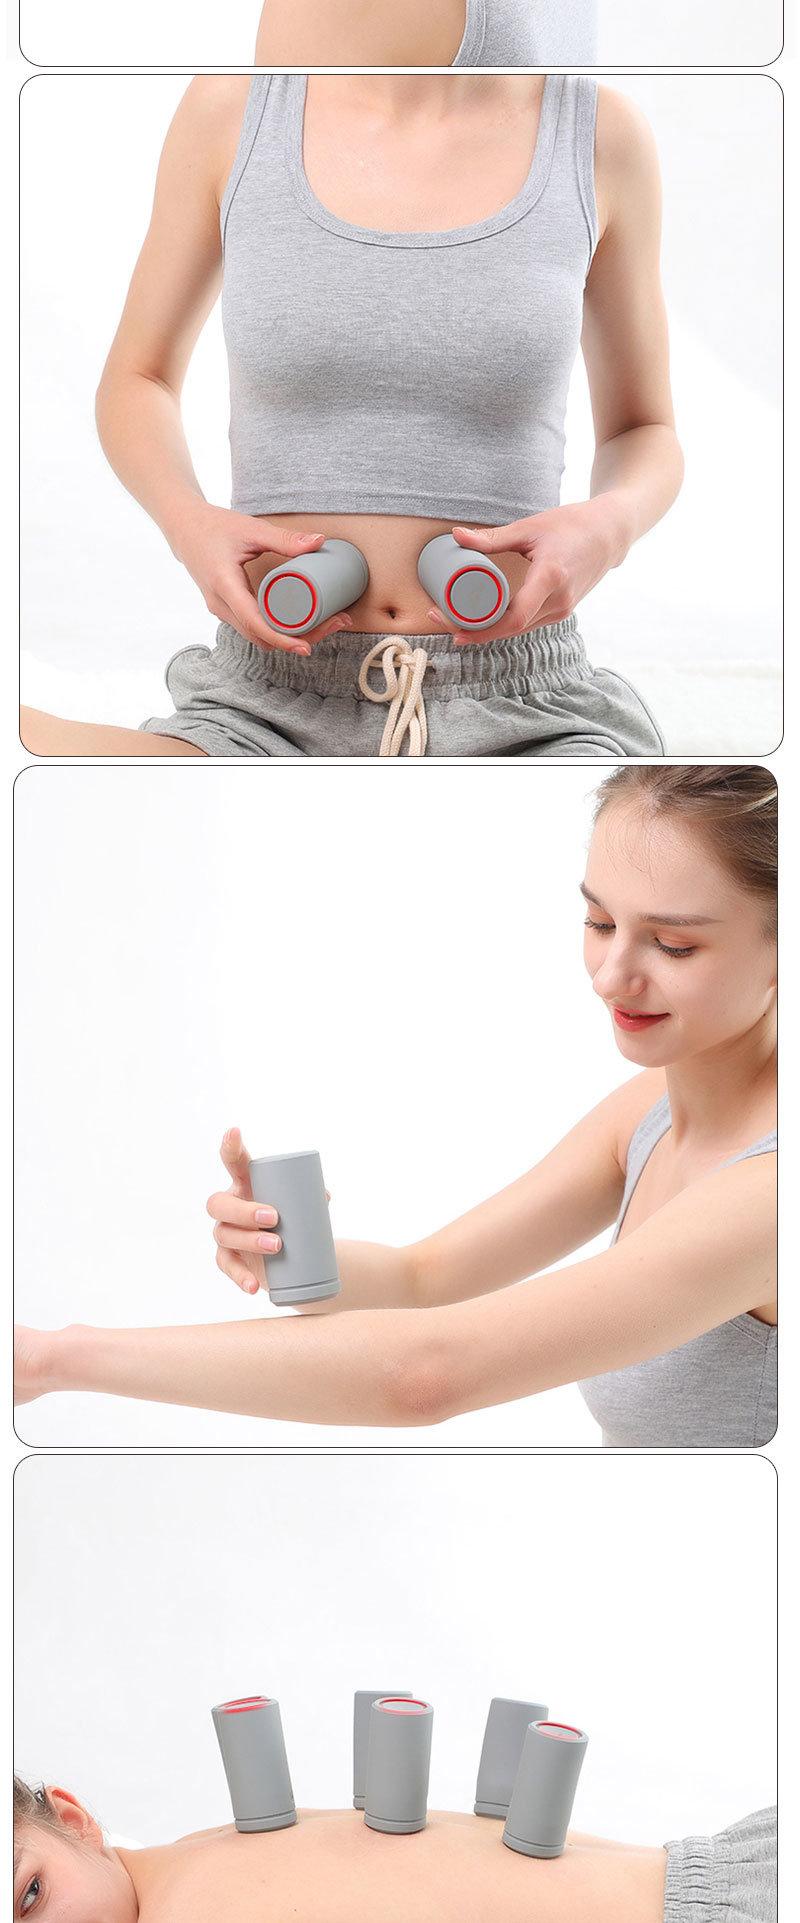 Hezheng Vacuum Cupping Suction Body Massage Cup Anti Cellulite Slim Slimming Equipment